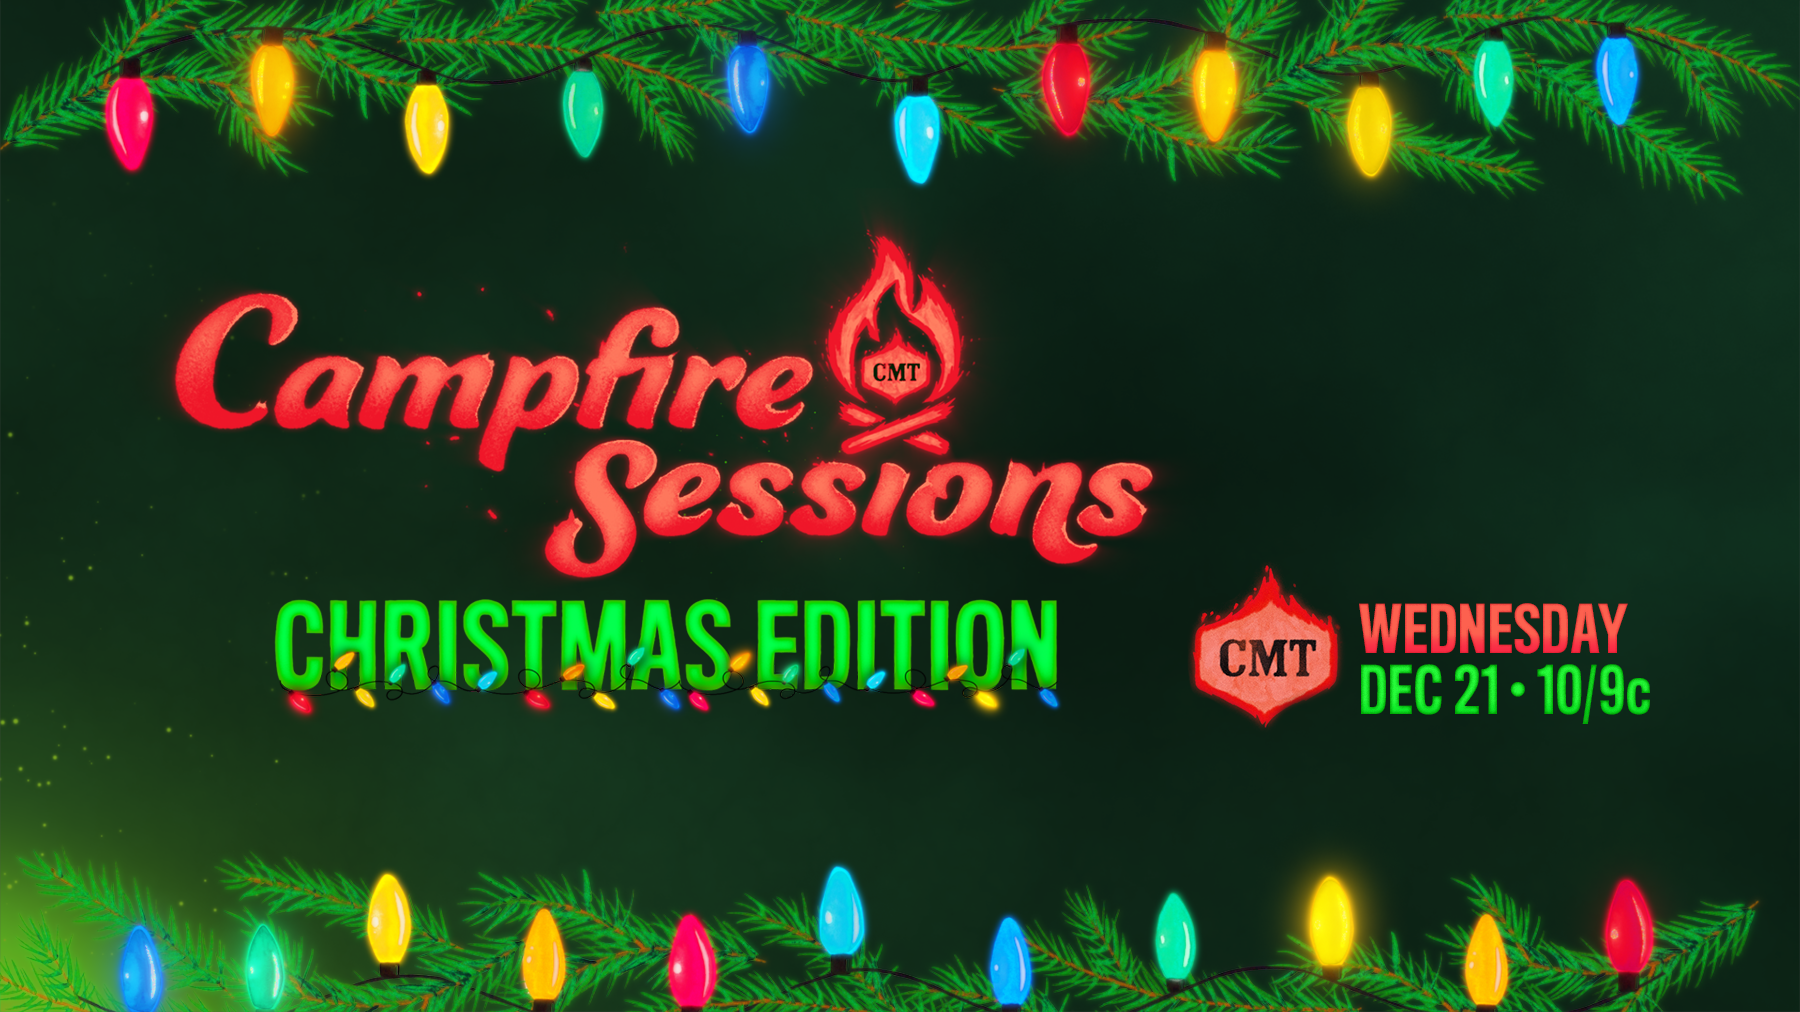 CMT Unwraps “CMT Campfire Sessions Christmas Edition" with an AllStar